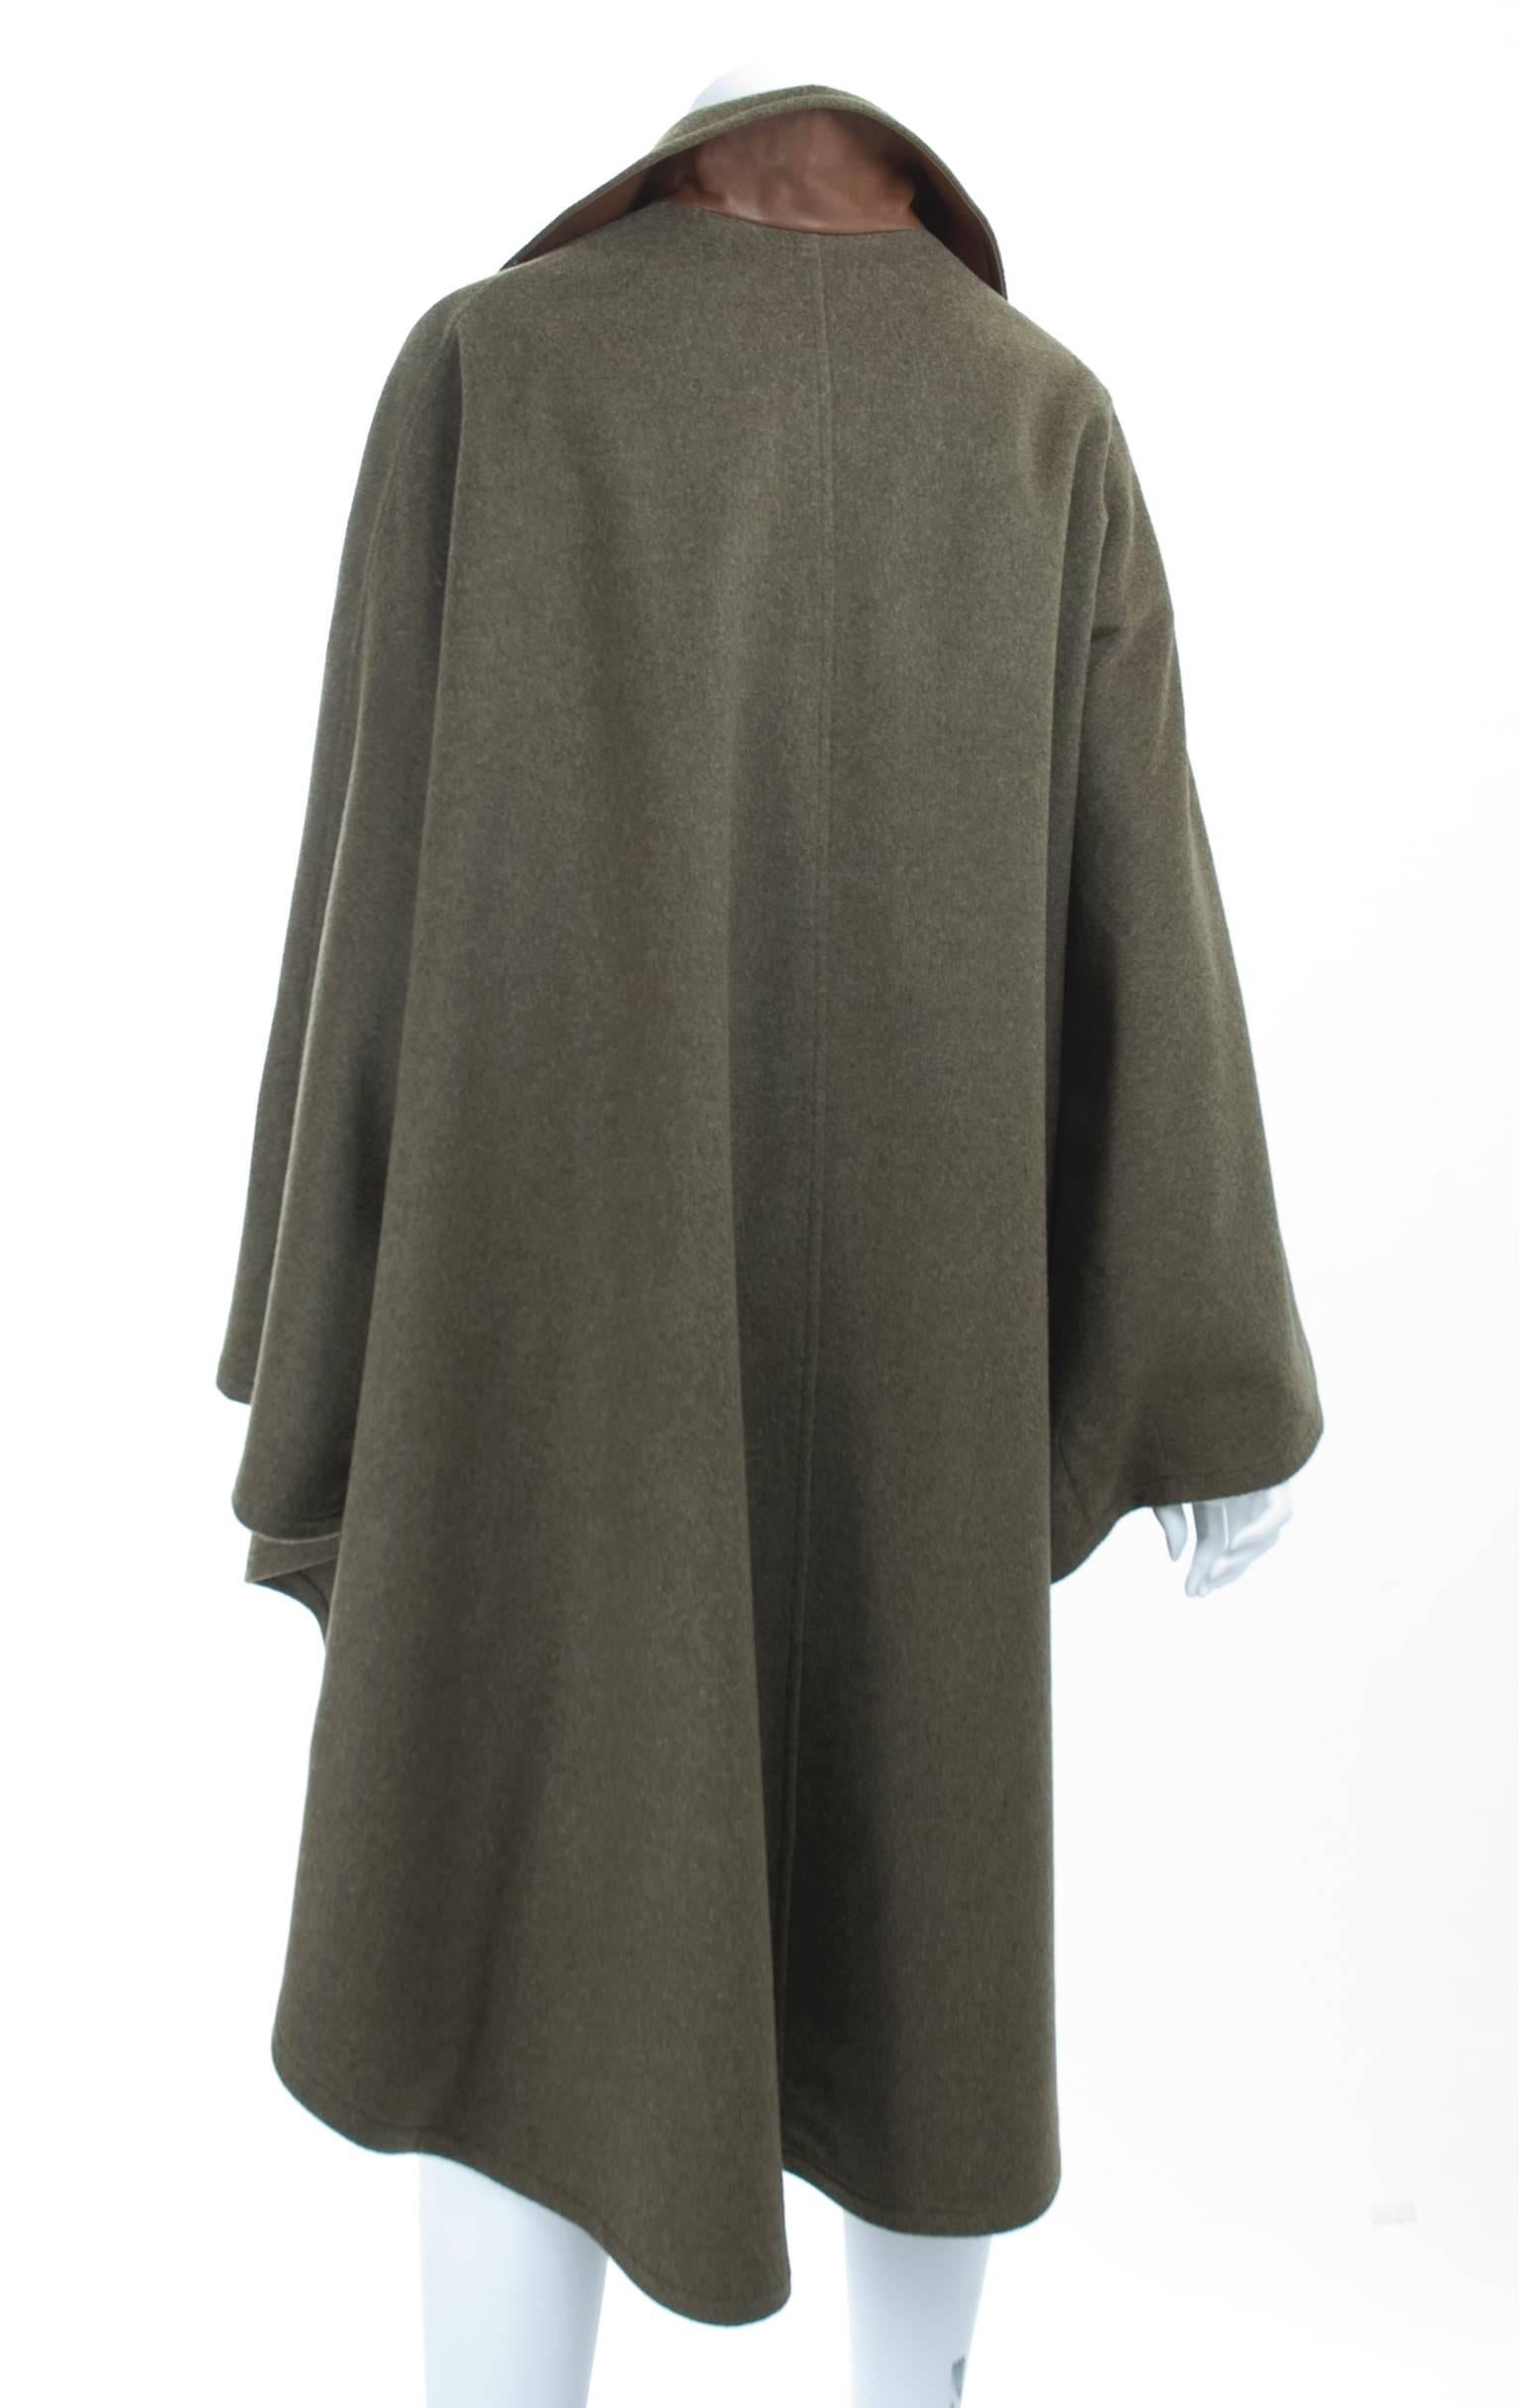 Black Vintage Hermes Cashmere/Wool Cape with Leather Trim